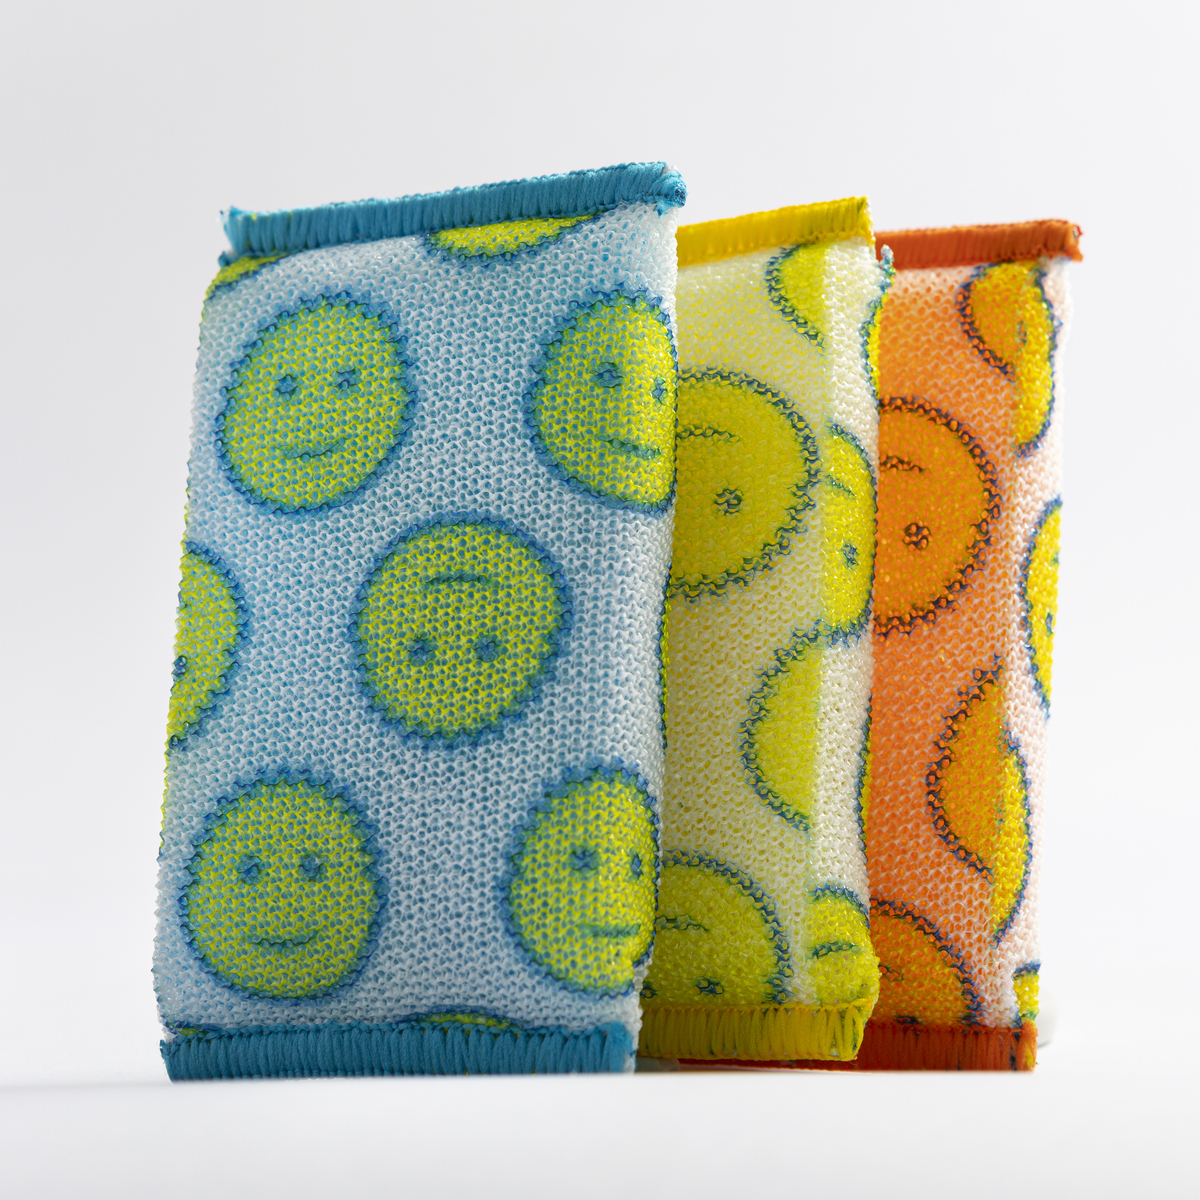  Scrub Daddy Scour Daddy Style Collection, Scourers